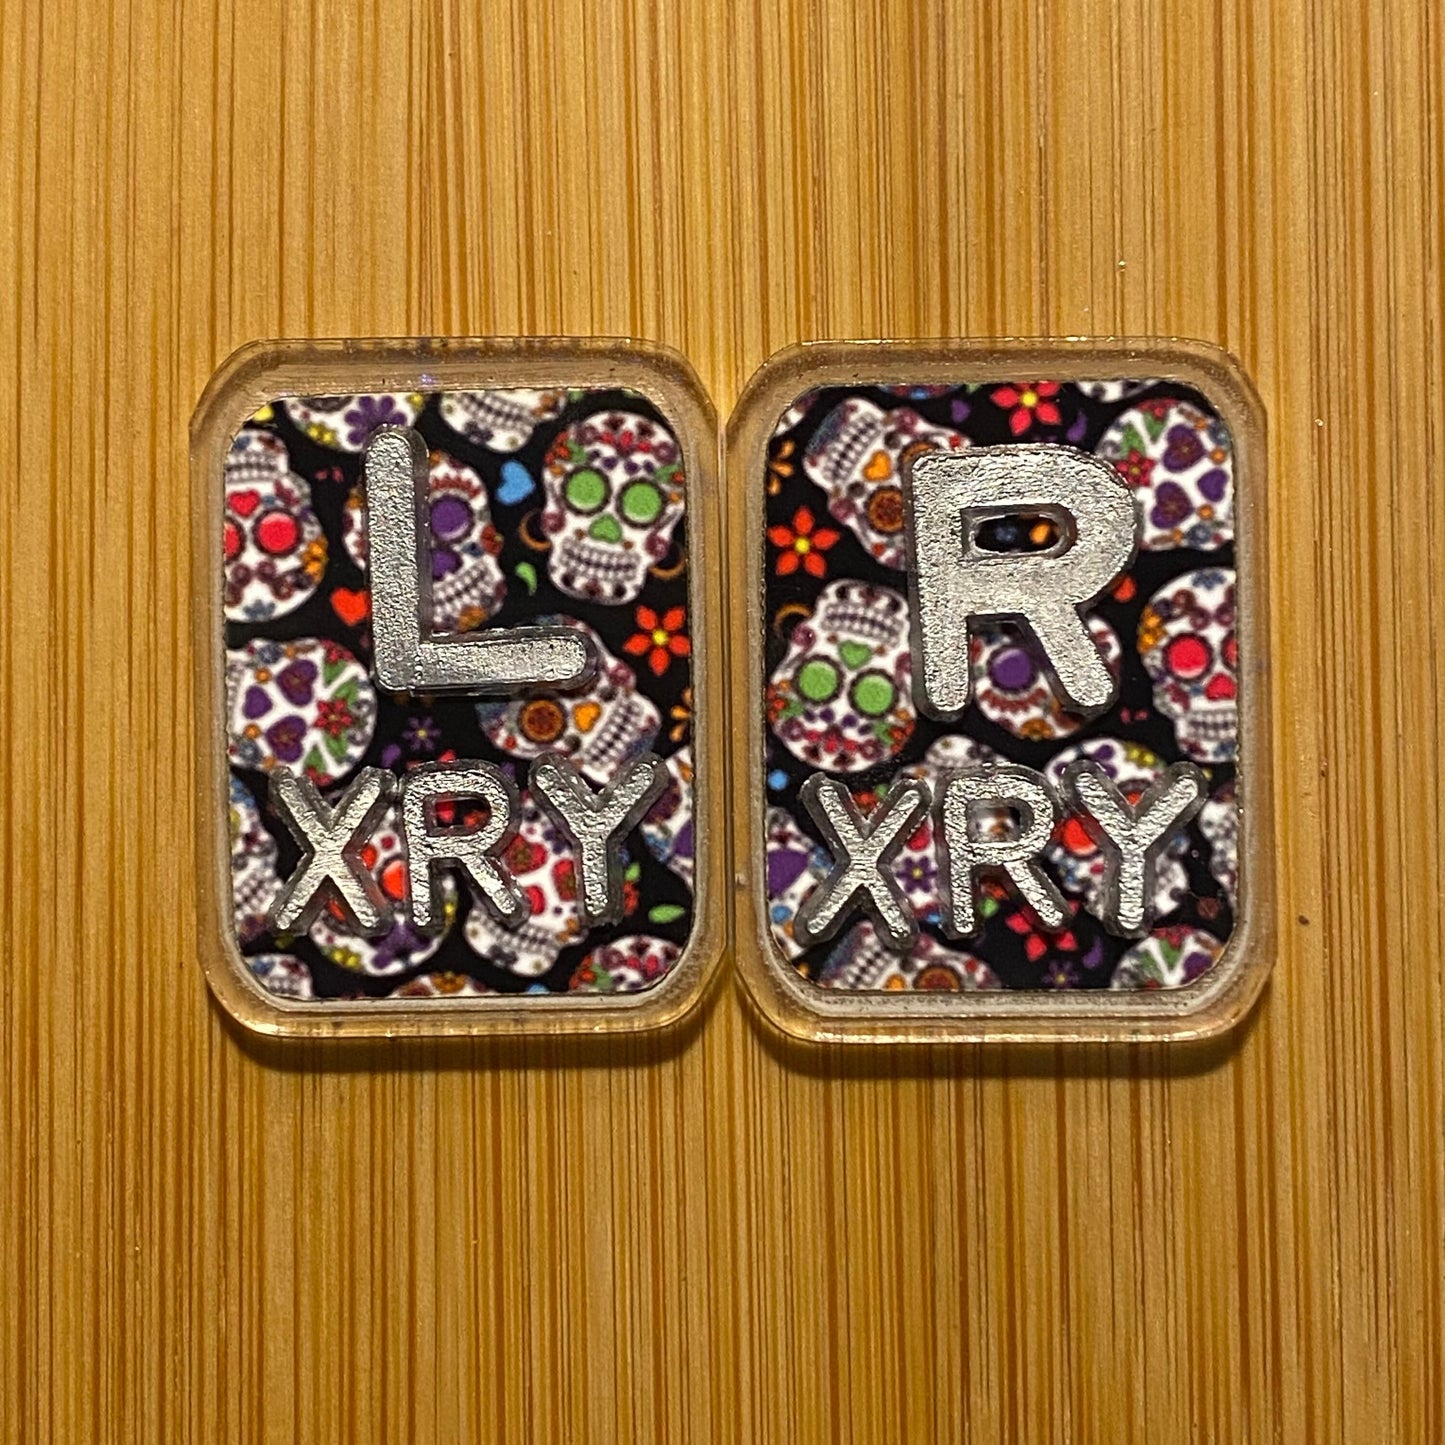 Sugar Skull Xray Markers with 2-3 Initials